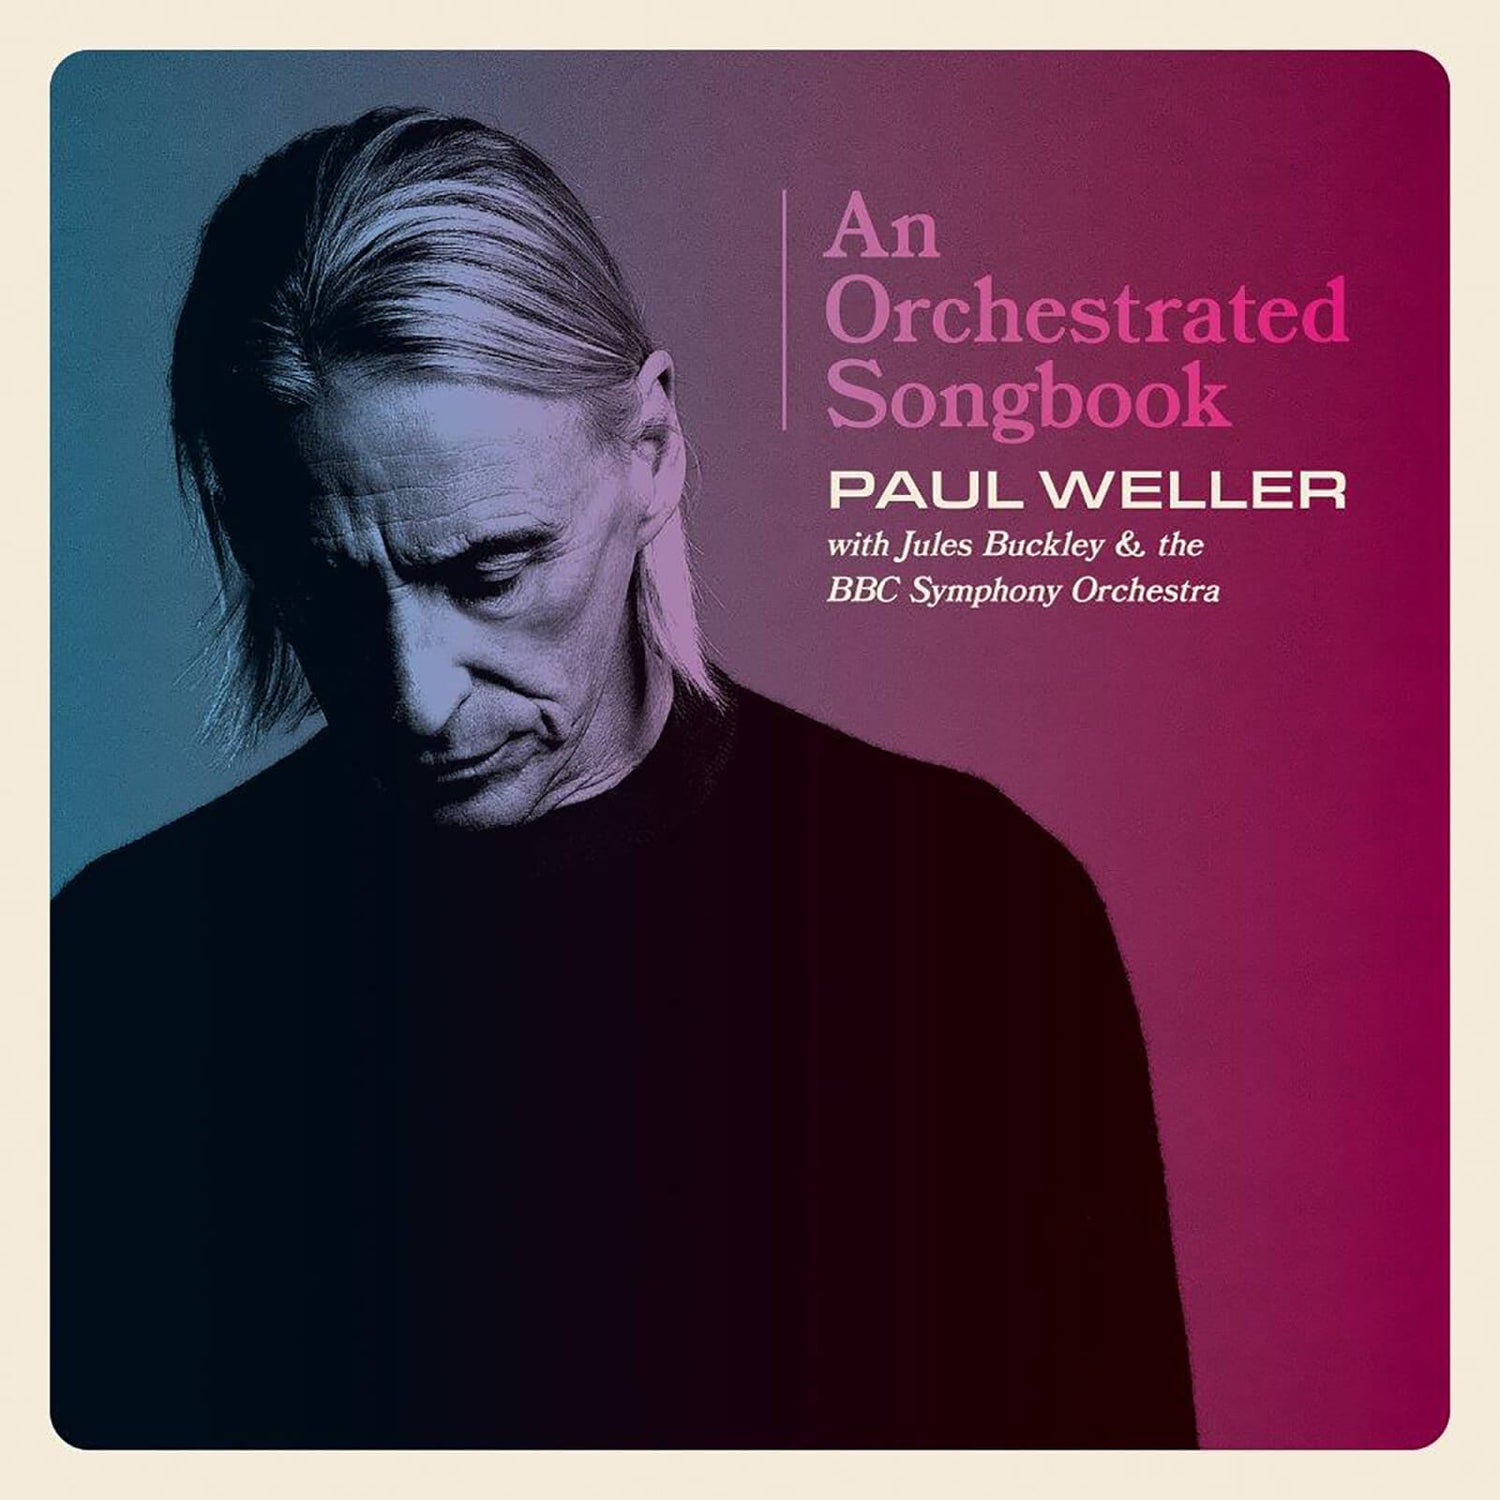 Paul Weller - Paul Weller - An Orchestrated Songbook With Jules Buckley & The BBC Symphony Orchestra Vinyl Set